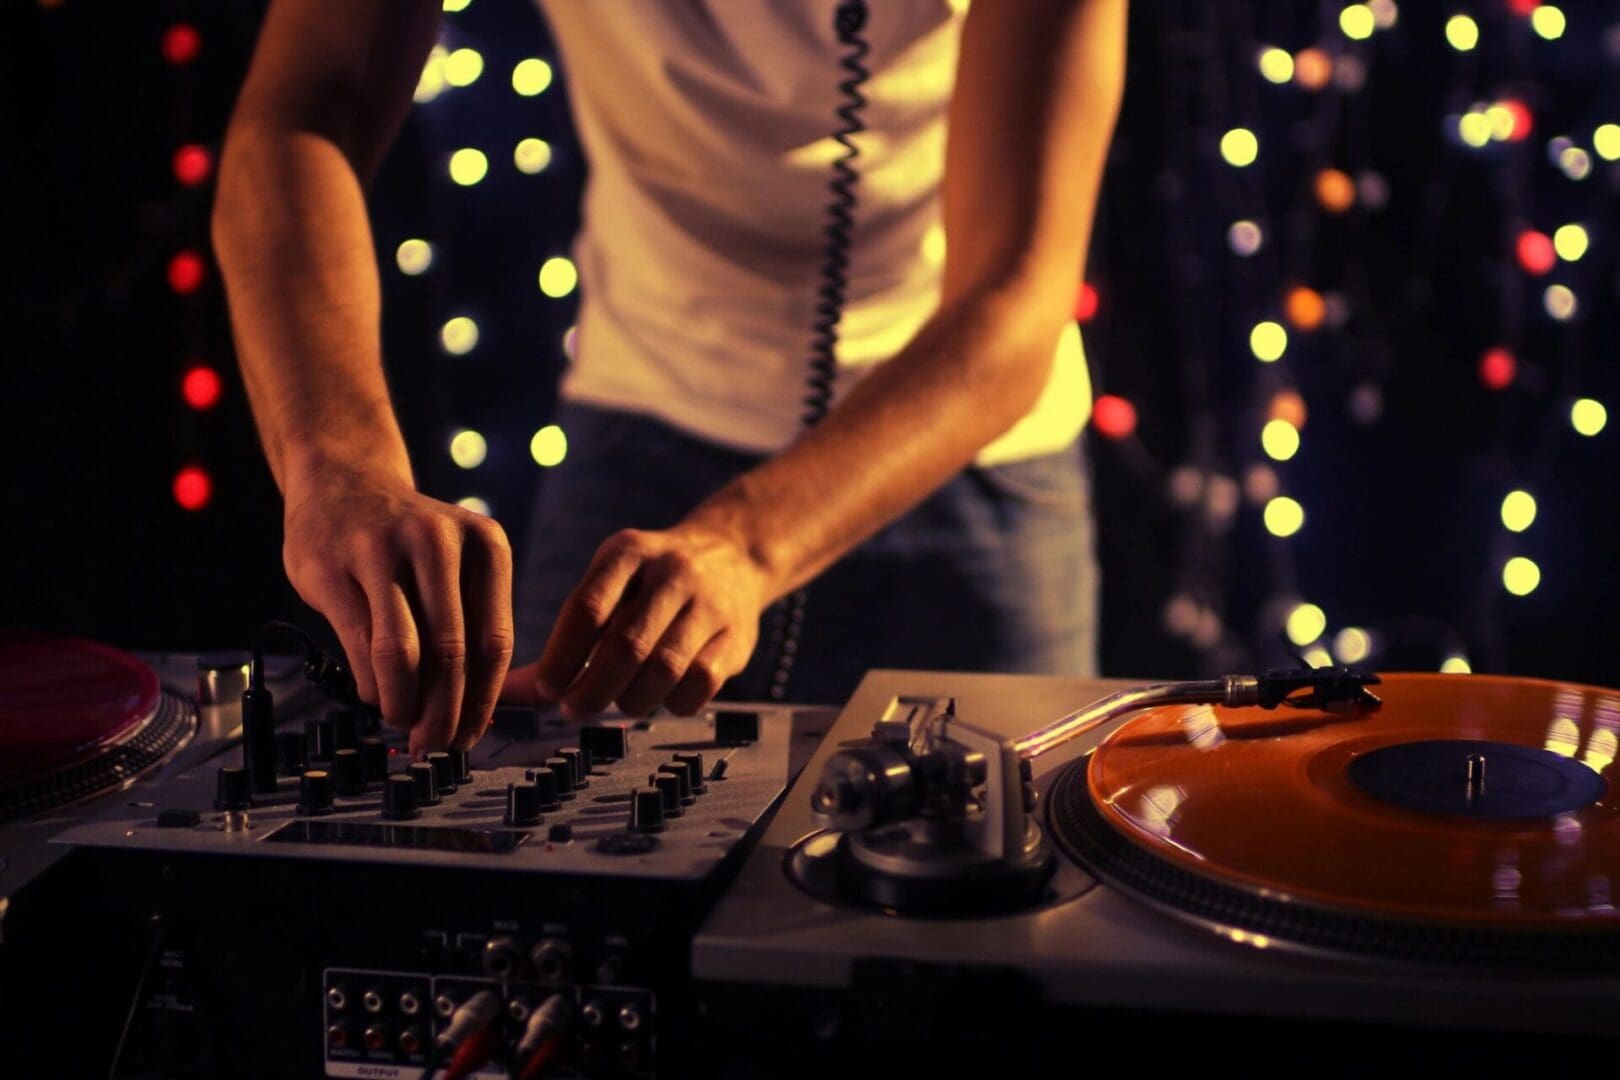 A dj is mixing music on a turntable.